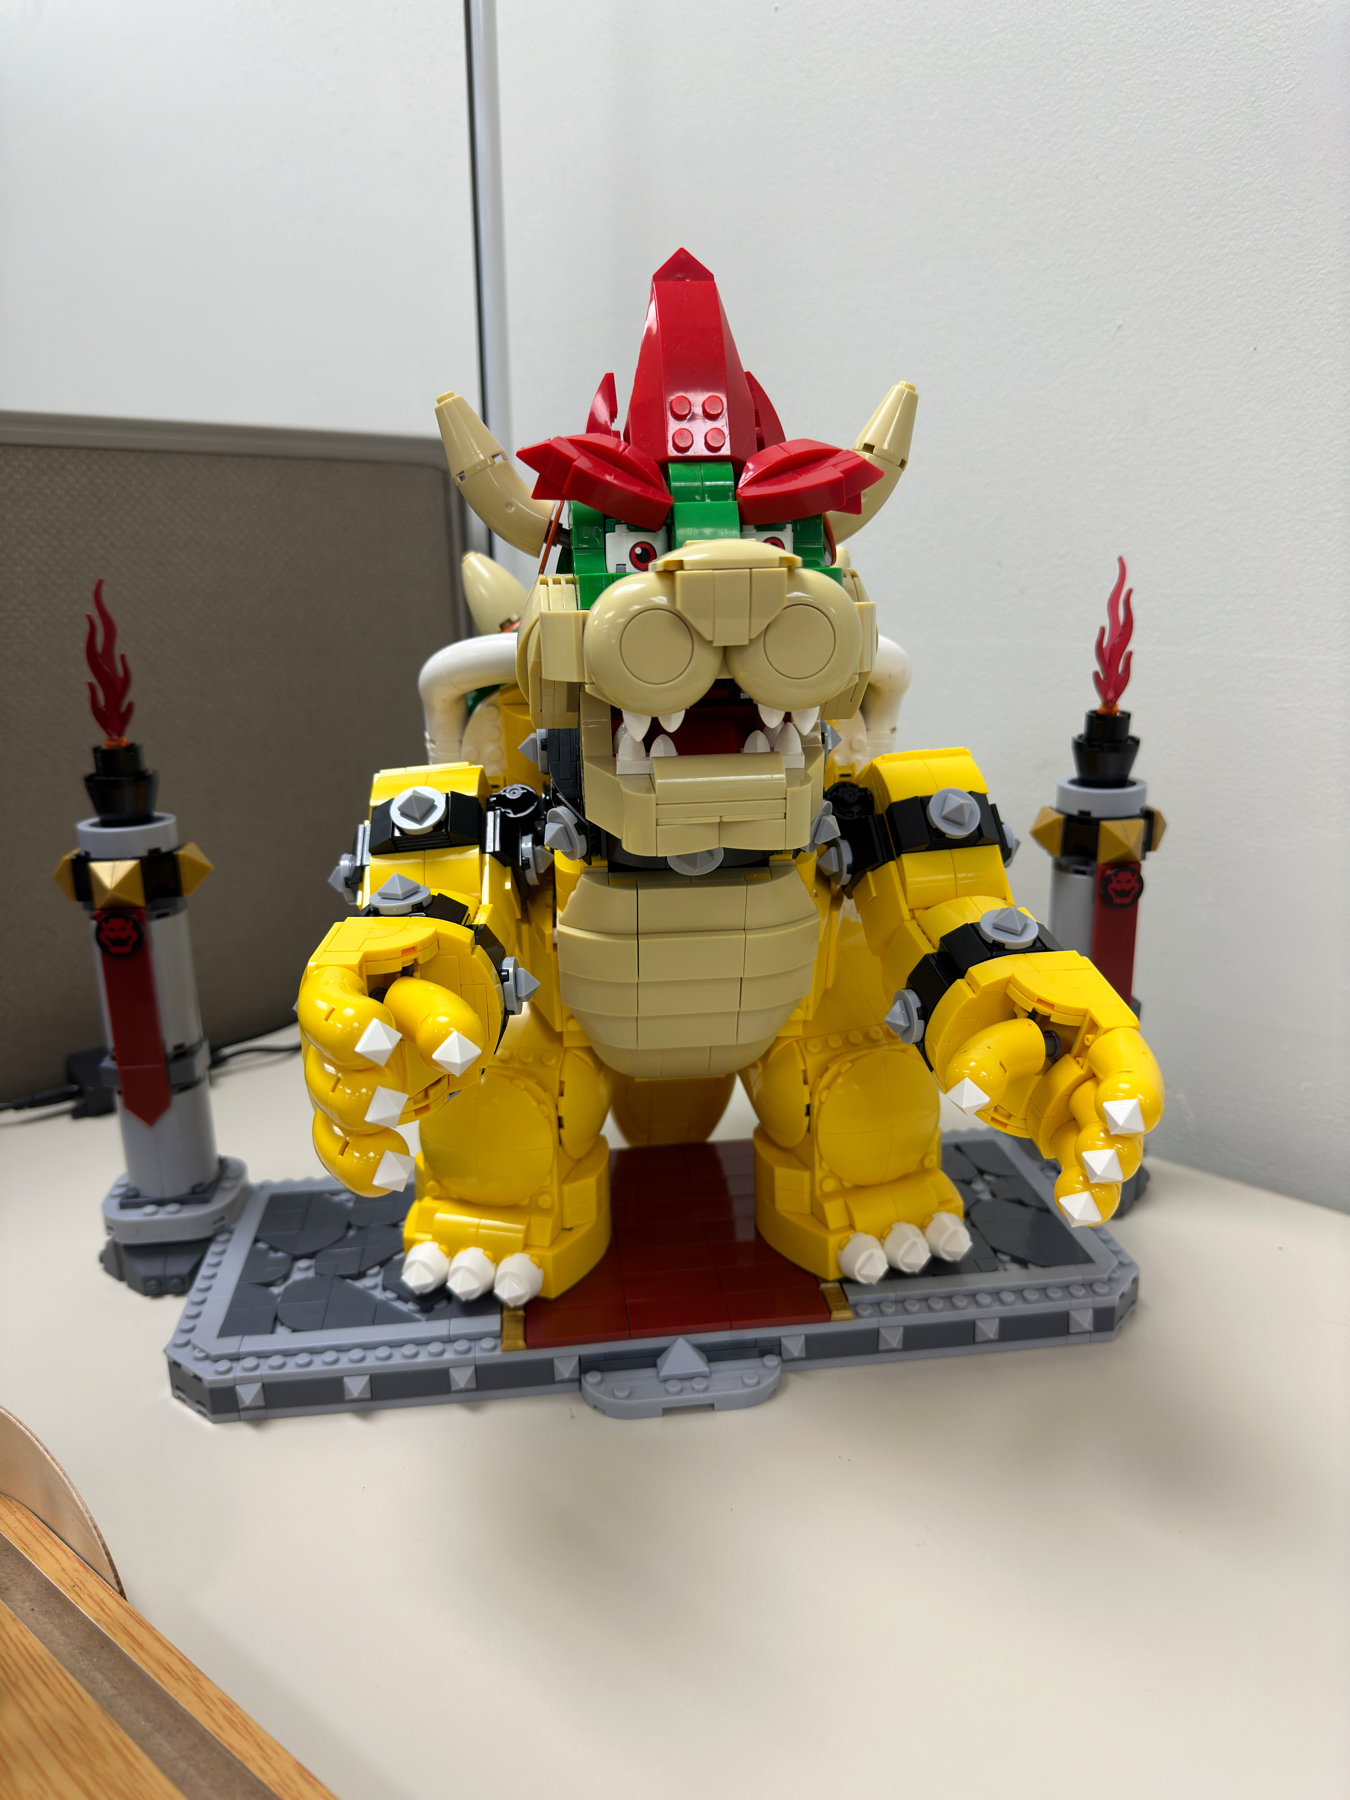 A LEGO model of a yellow and red dragon displayed on a desk, with brick-built flames on either side of the base platform.